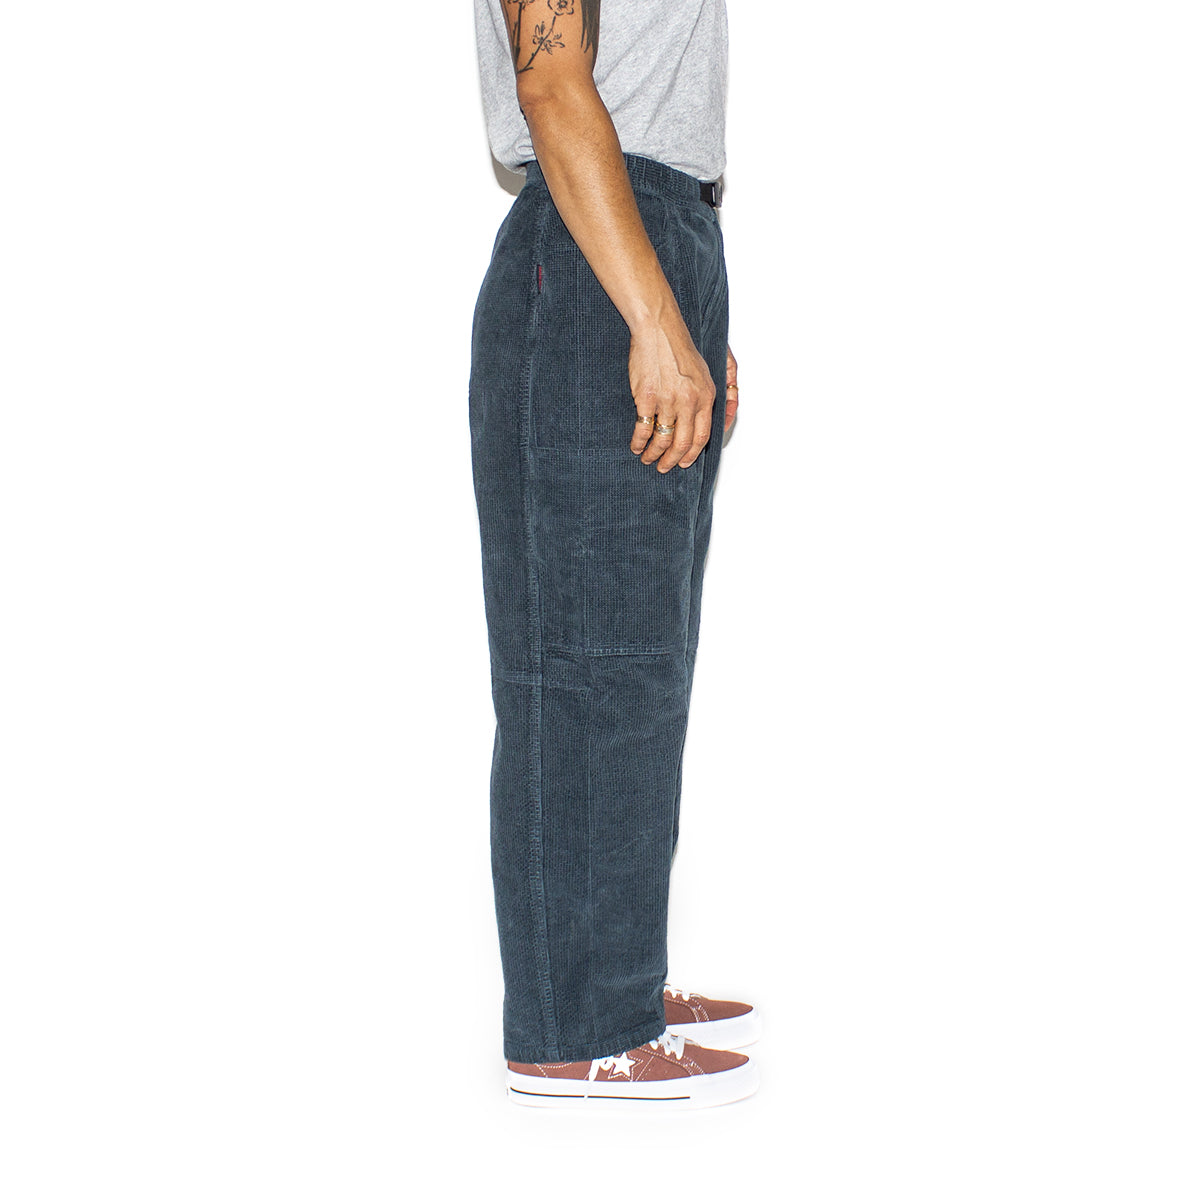 Gramicci | Women's Waffle Cord Voyager Pant Style # G3FW-P006 Color : Foggy Pine Dye